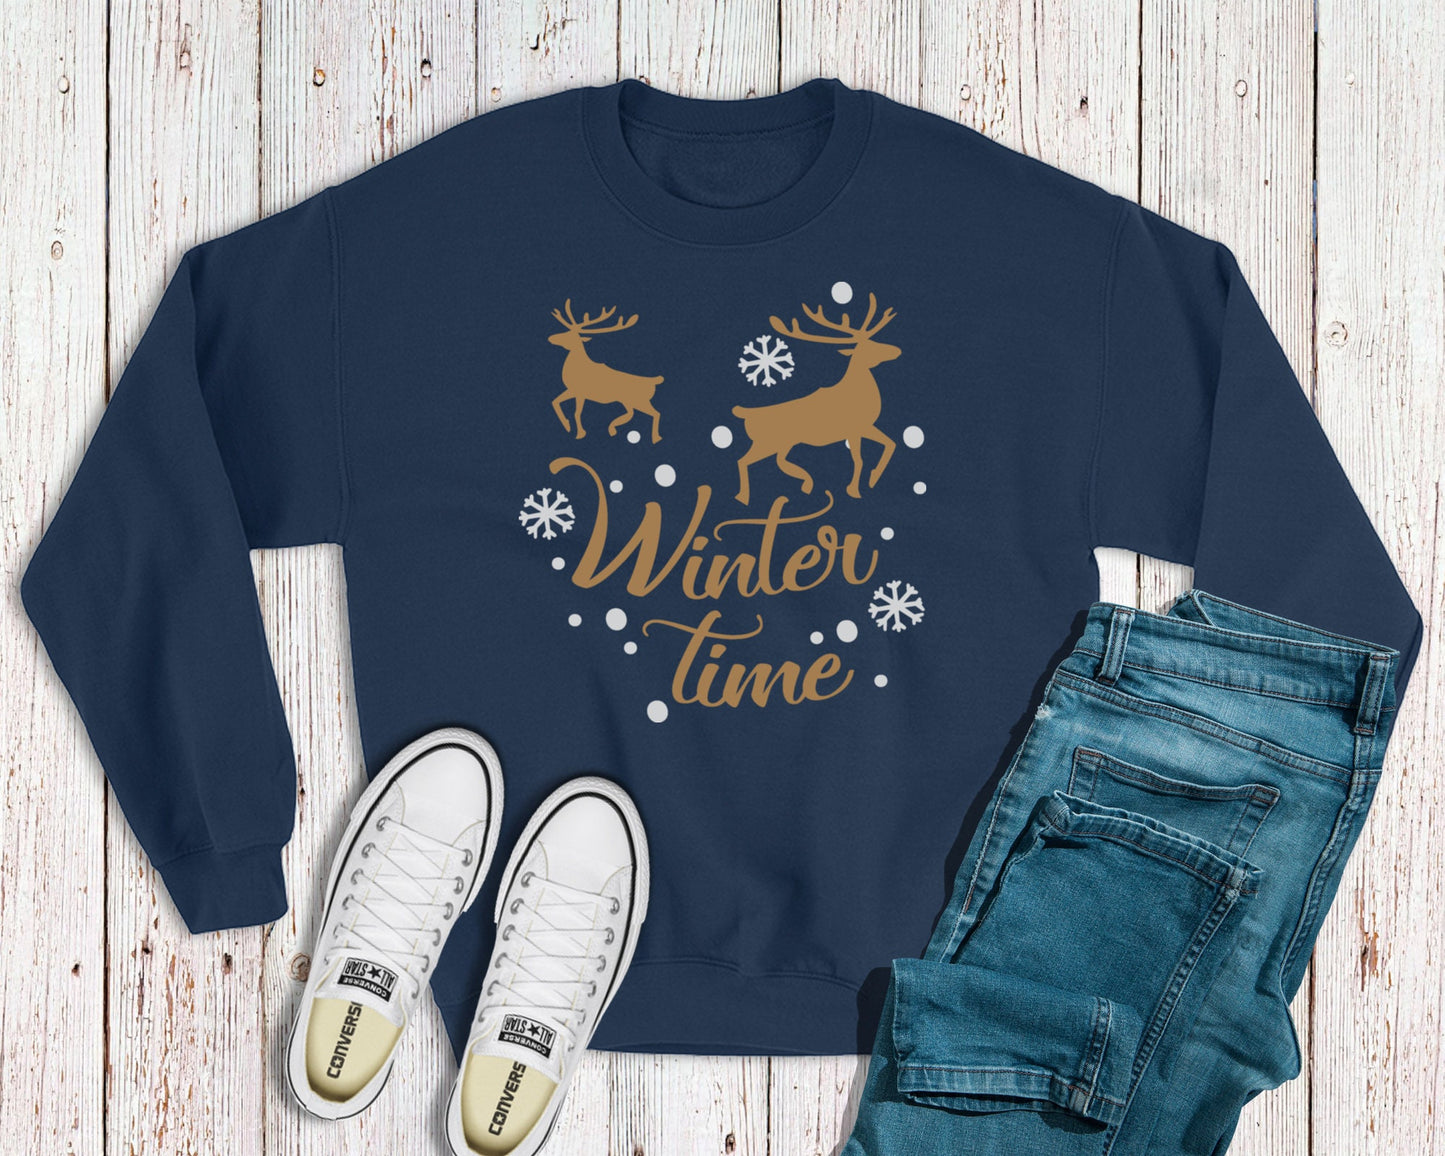 Winter Time Sweatshirt, Winter Time Shirt, Winter Time Hoodie, Winter Blessings, Merry Christmas, Holiday Shirt, Christmas Gift